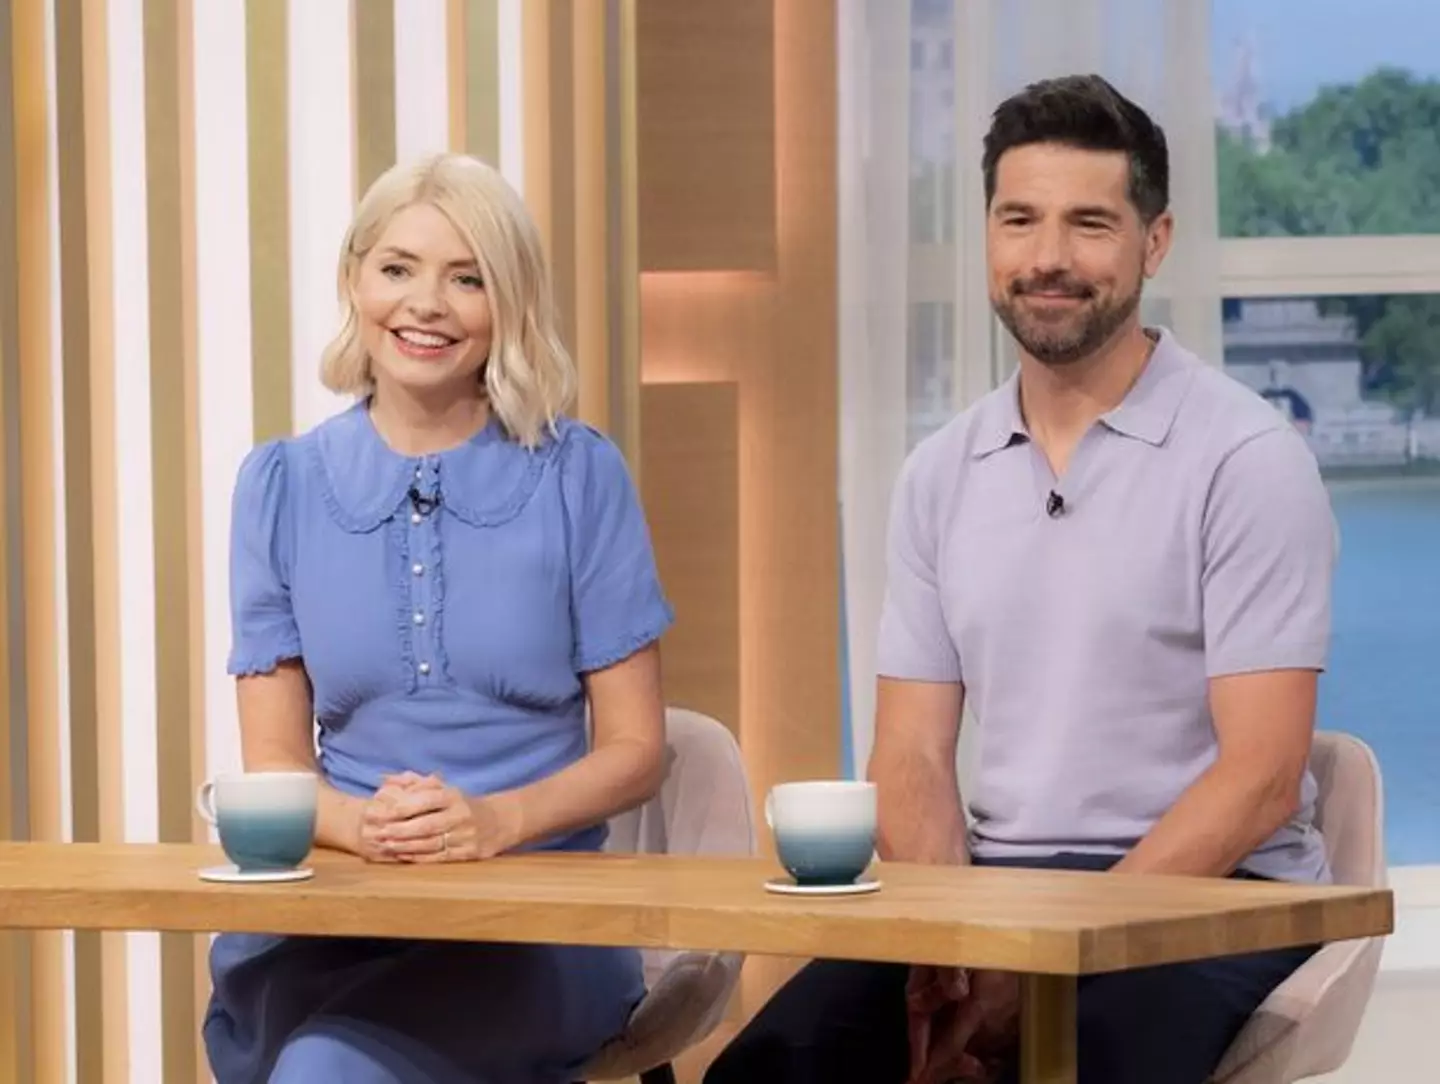 Fans know exactly who they want to replace Phillip Schofield on This Morning.